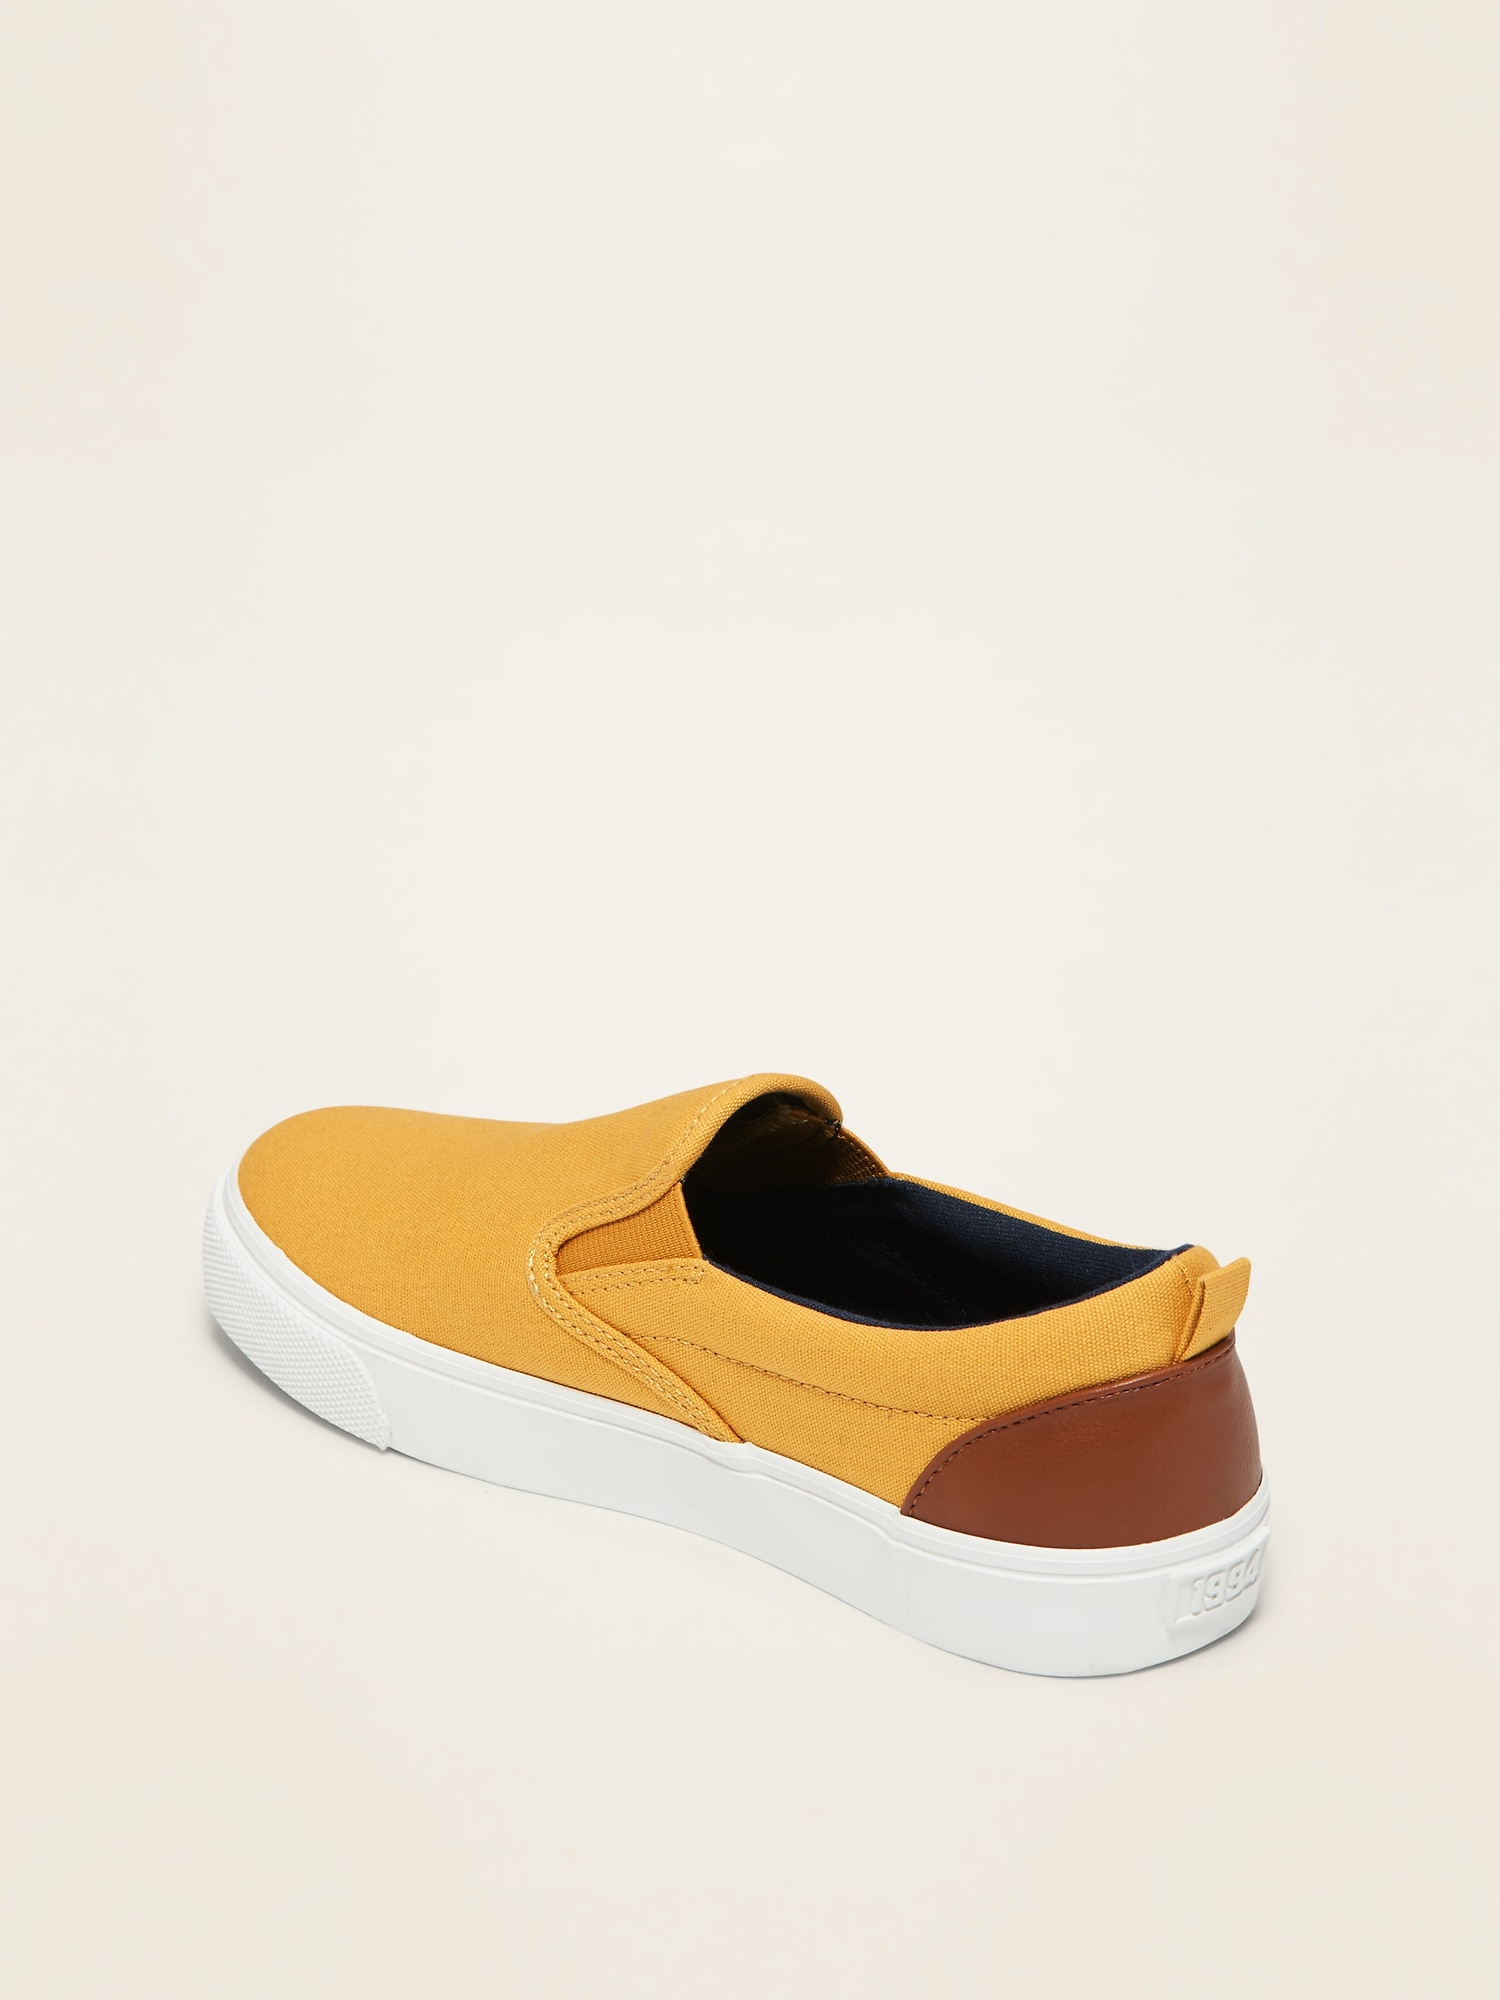 Gender-Neutral Canvas Slip-On Sneakers For Kids | Old Navy